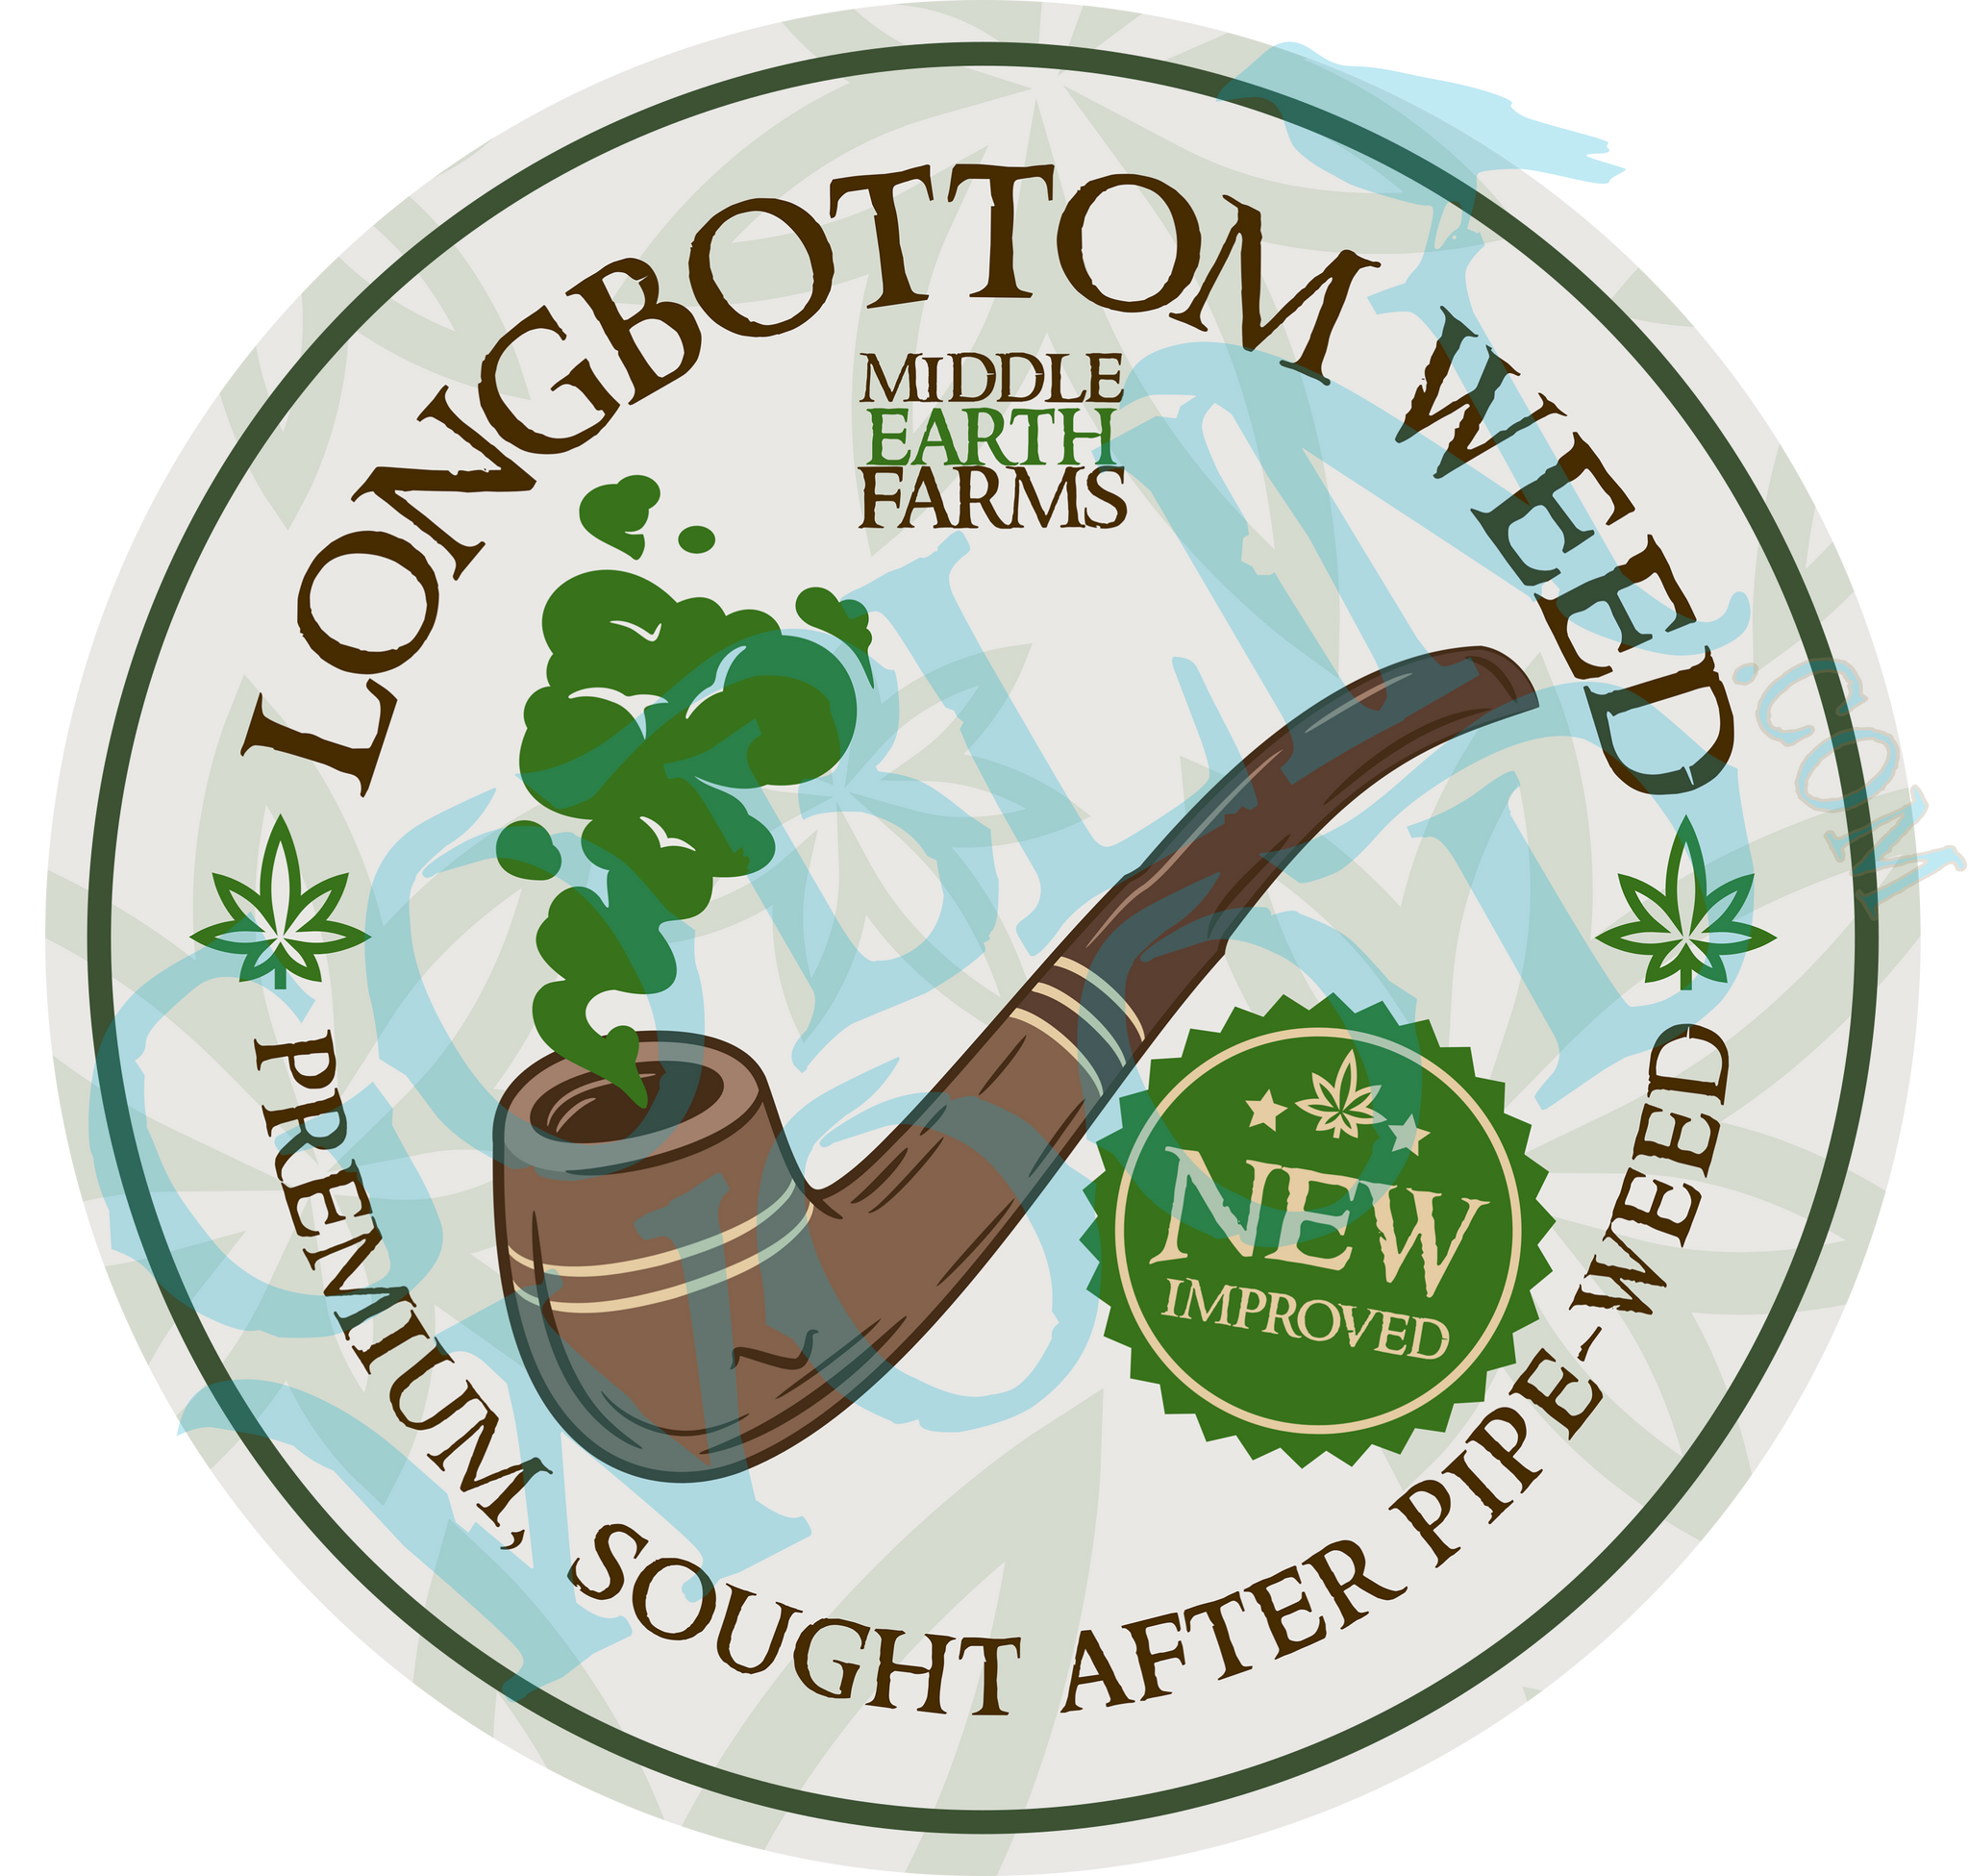 Longbottom Weed Potion - LOTR/The Hobbit Inspired